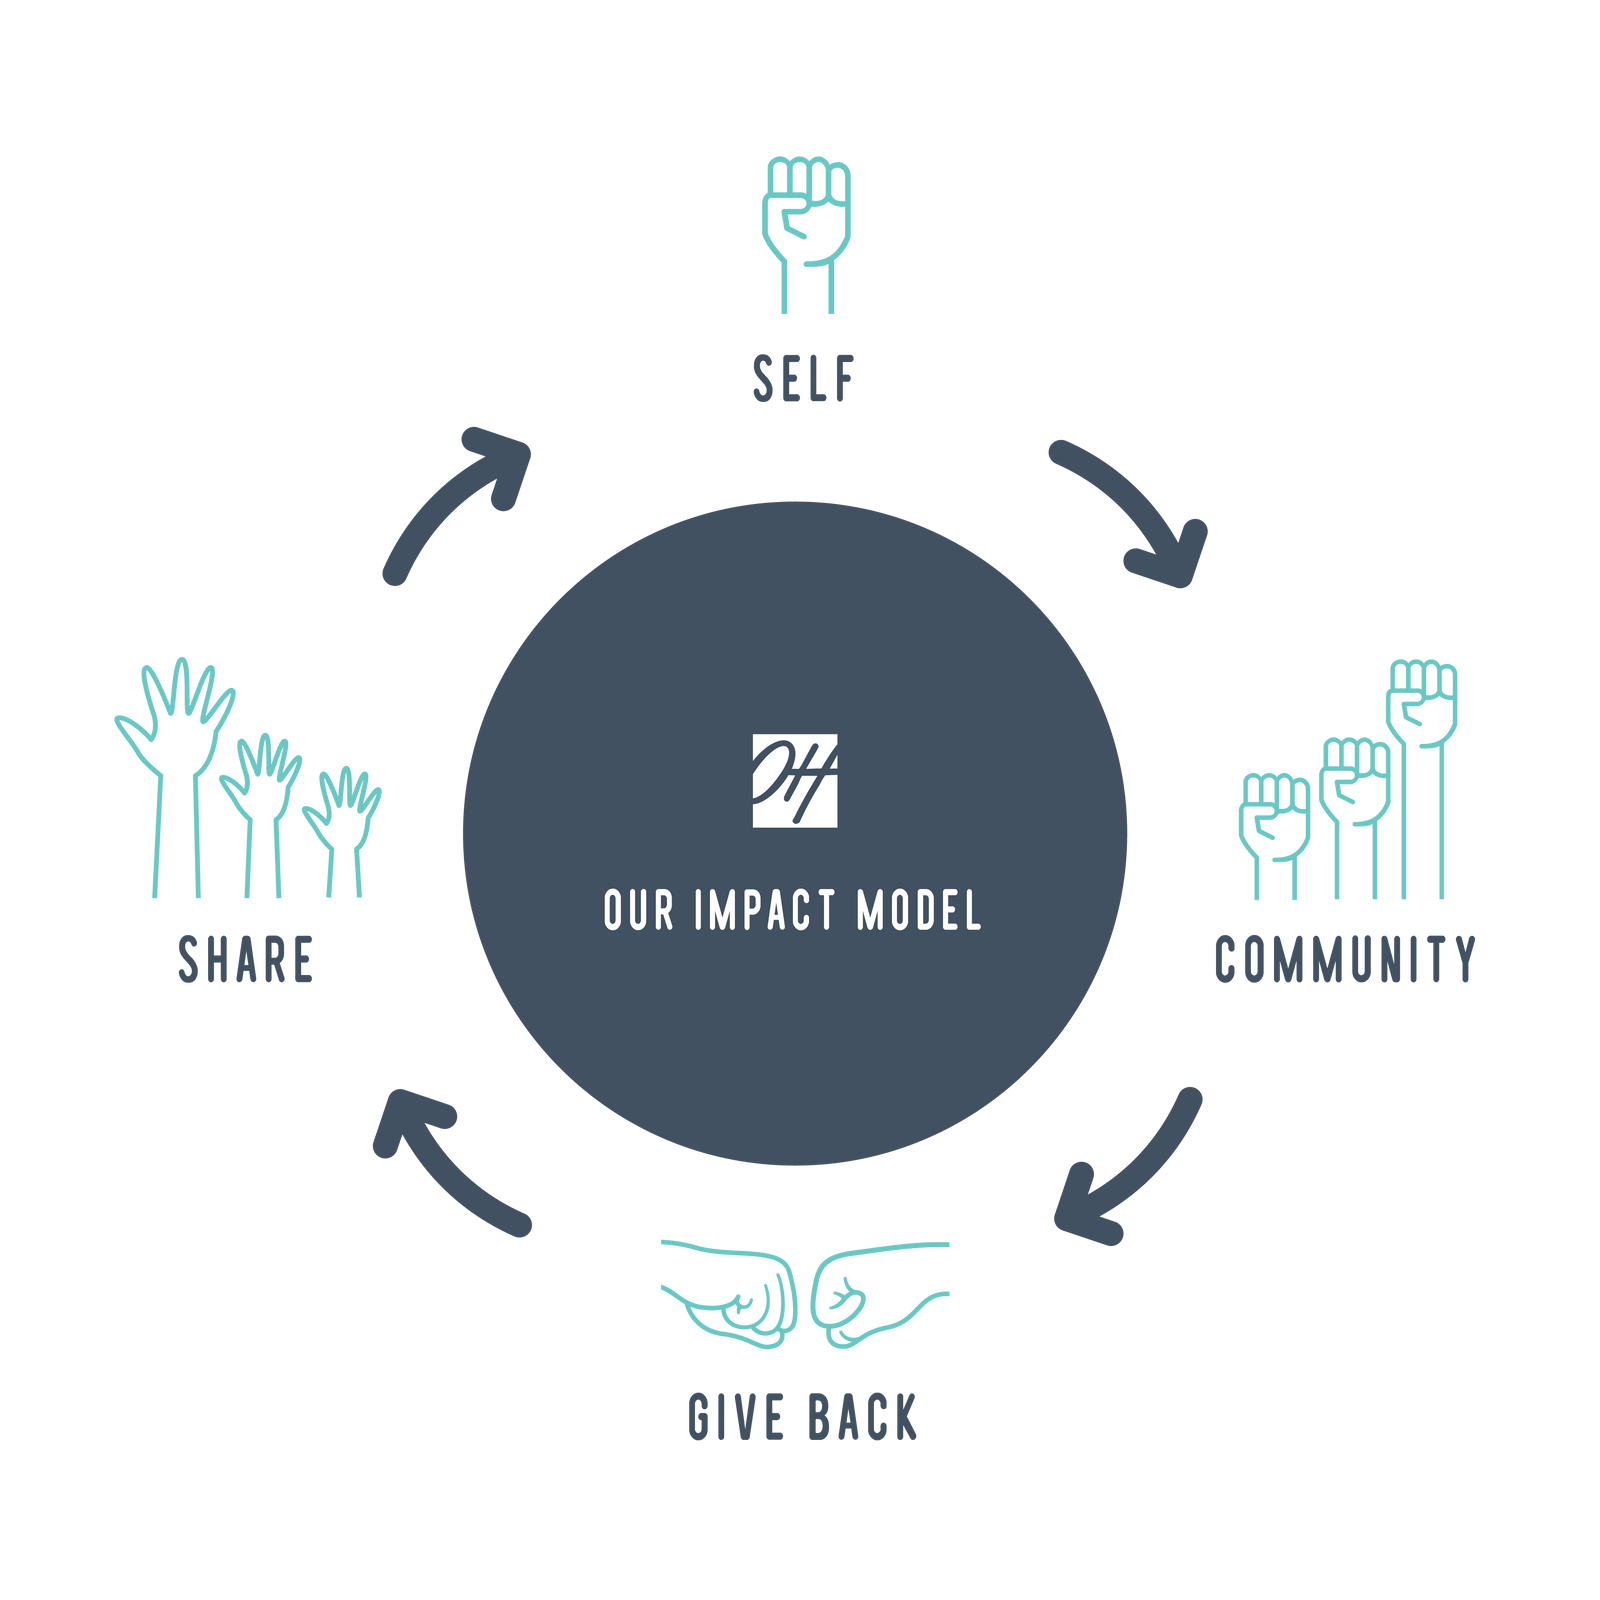 only human impact model that reads "Self, community, give back, share" with various icons of hands